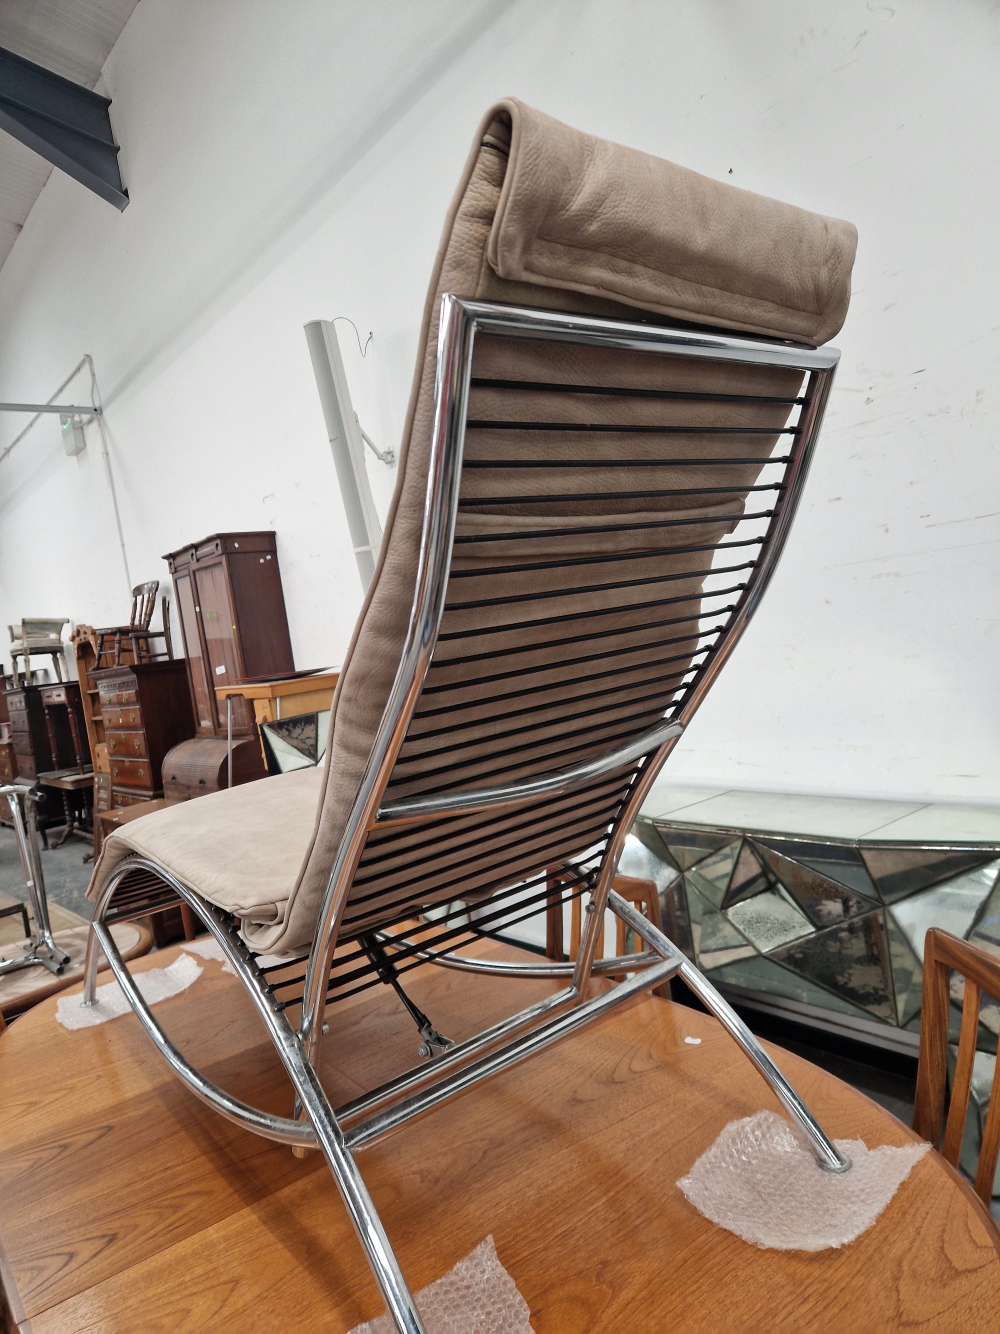 A CORBUSIER STYLE CHROME LOUNGER WITH LOOSE CUSHIONS. - Image 6 of 6